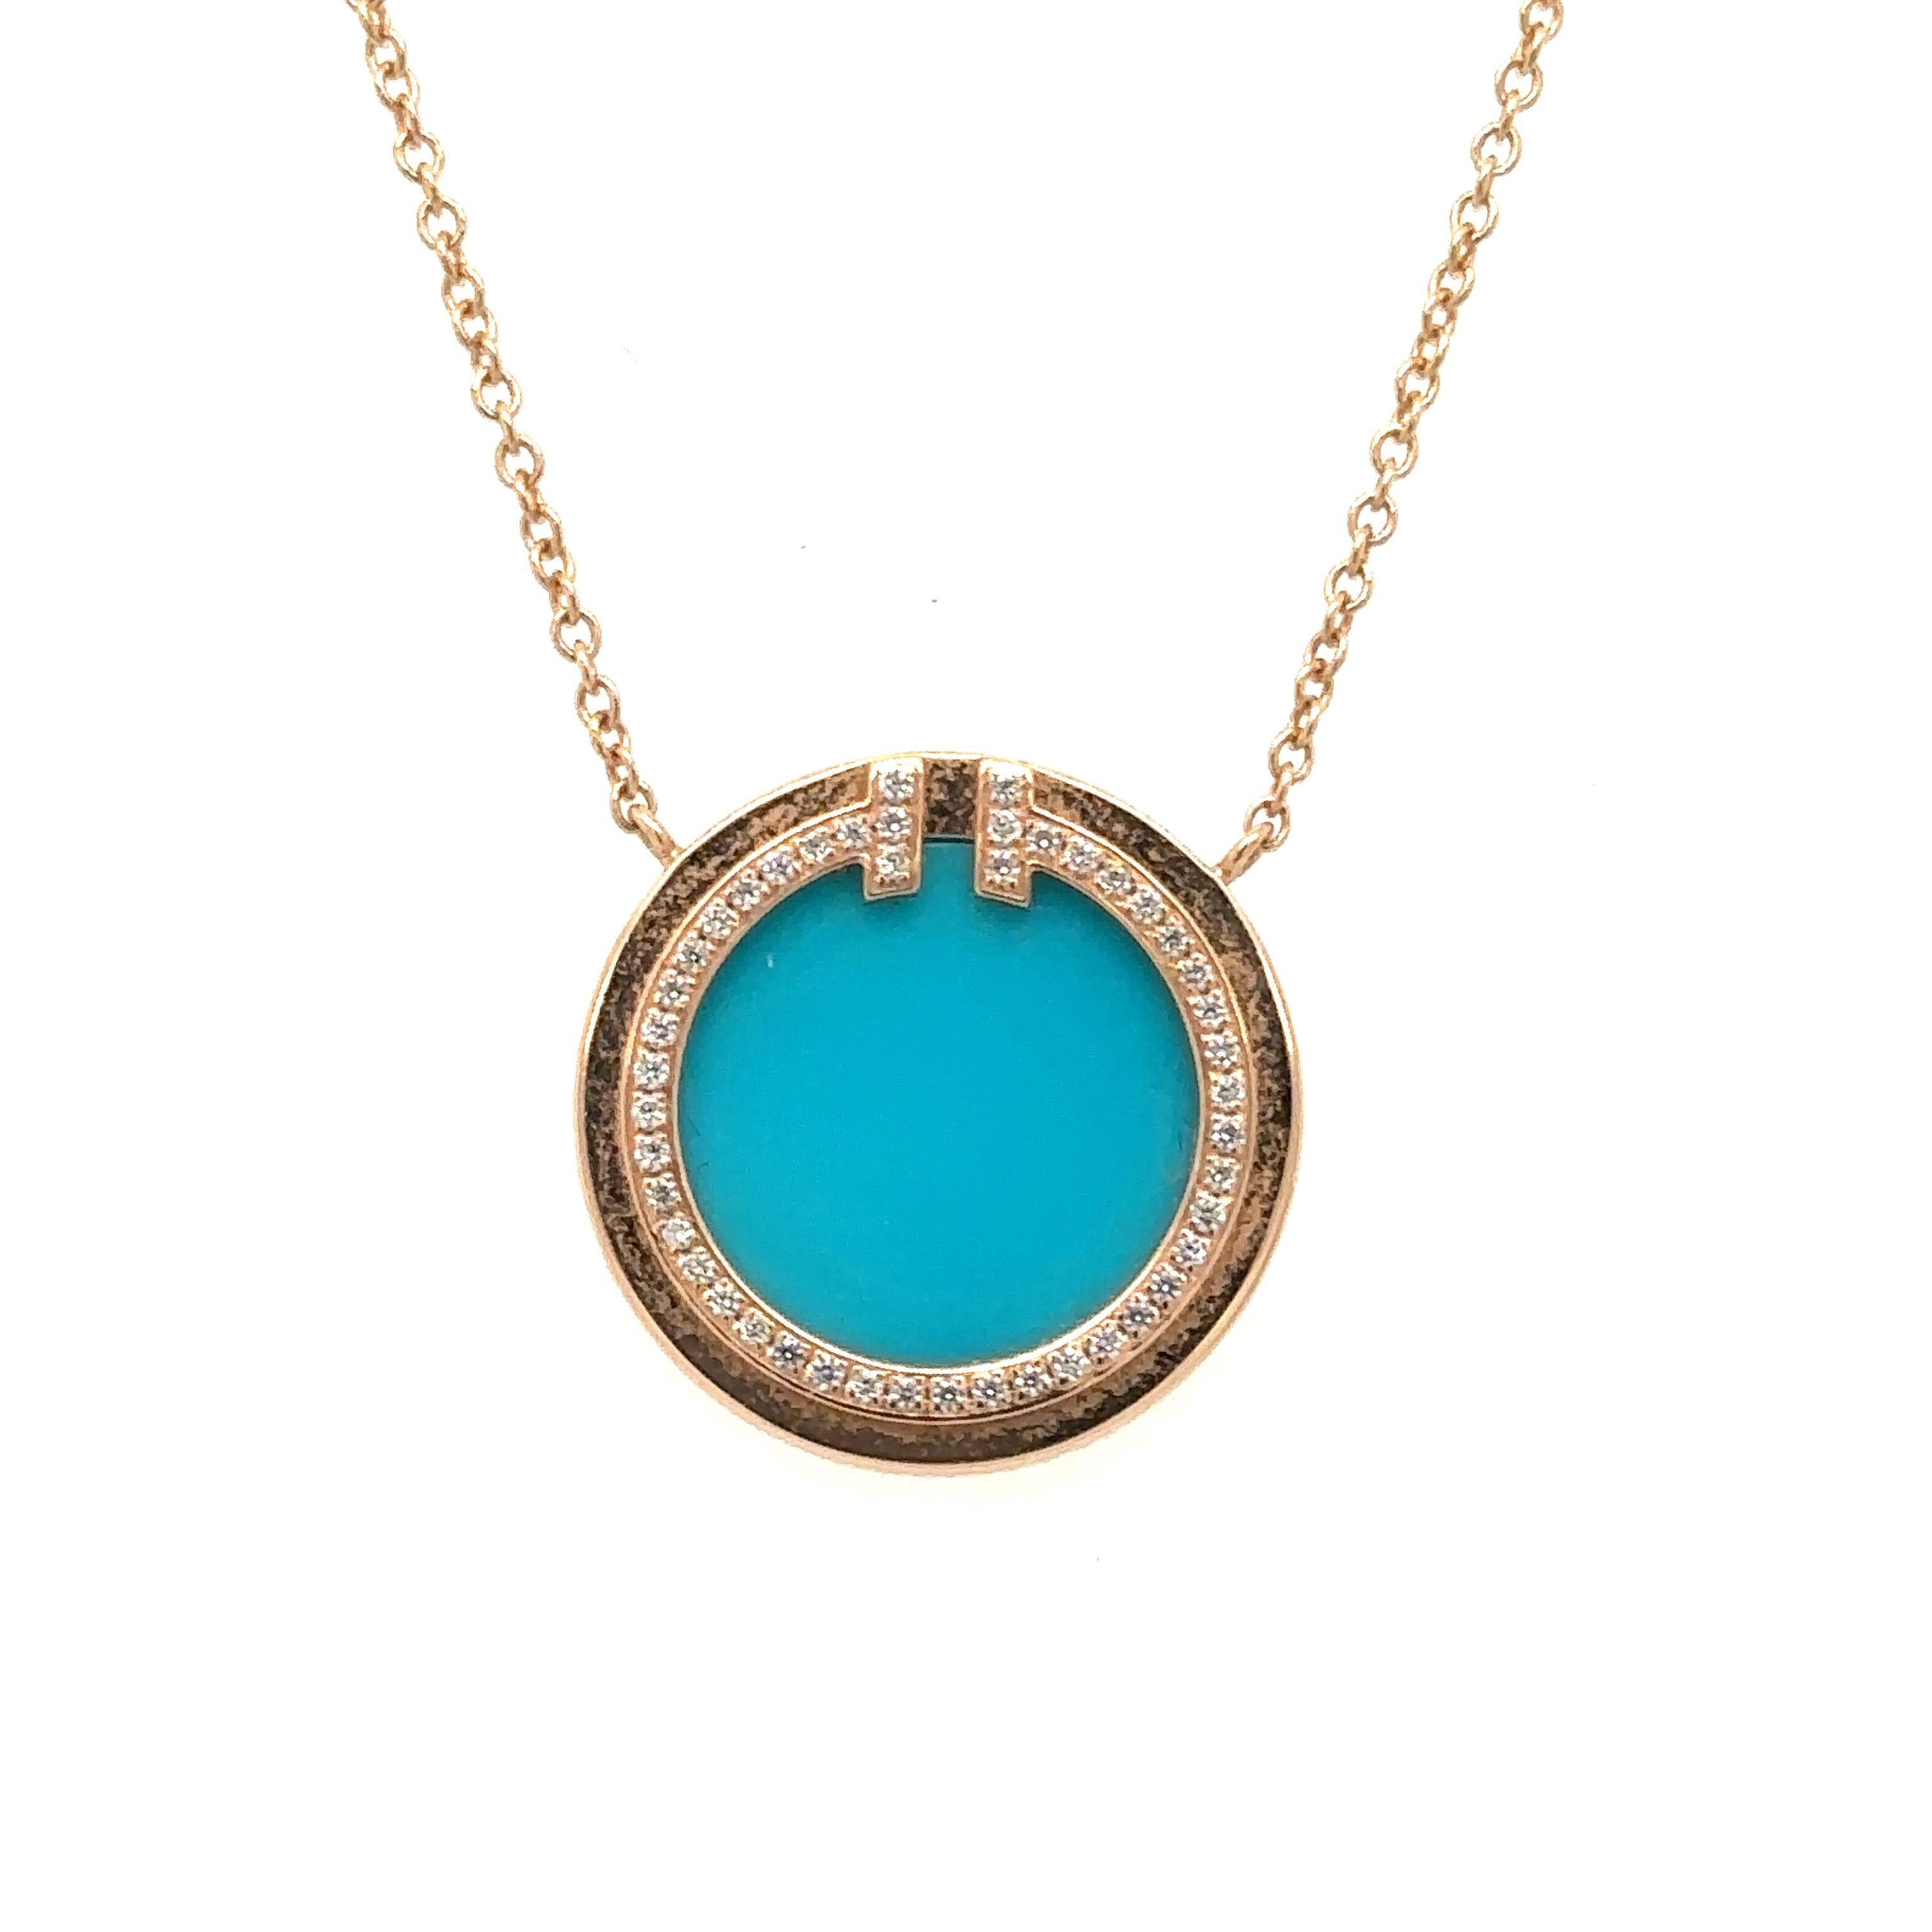 Item Details: This pendant from Tiffany & Co's T collection features a beautiful blue turquoise disc and accent diamonds. It is a modern item from the 2000s and has the most beautiful contrast color combination. The hues of turquoise sit beautifully